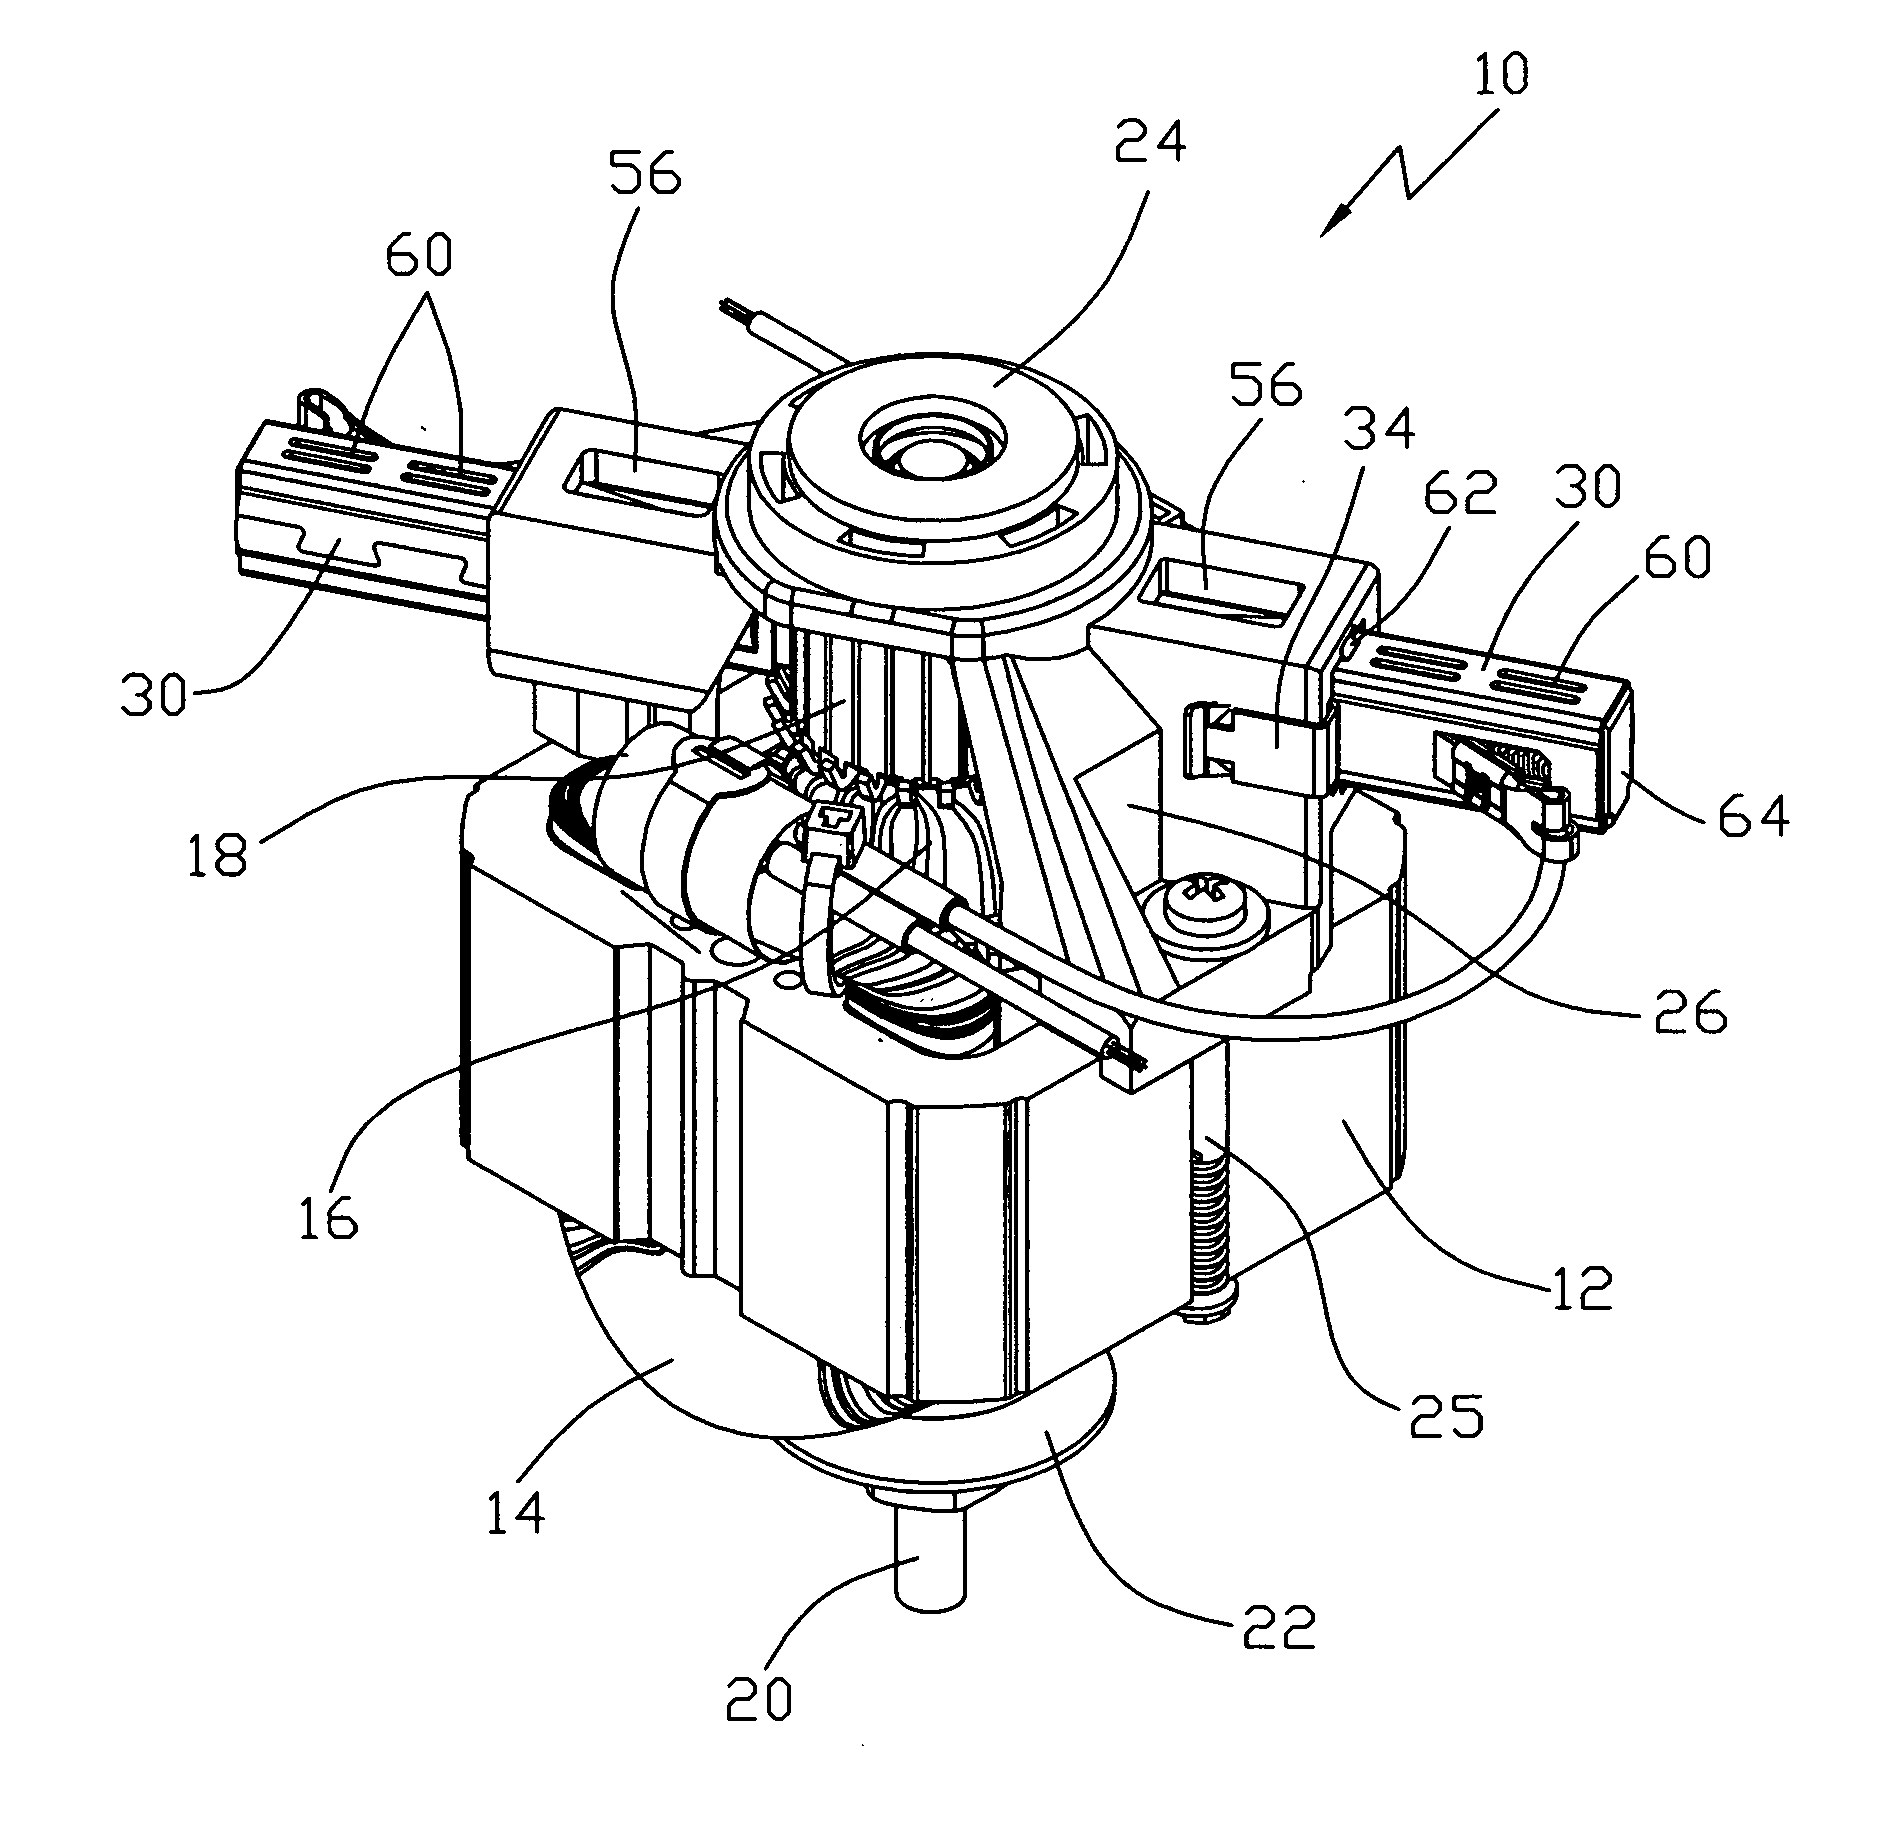 Brush holder assembly for an electric motor